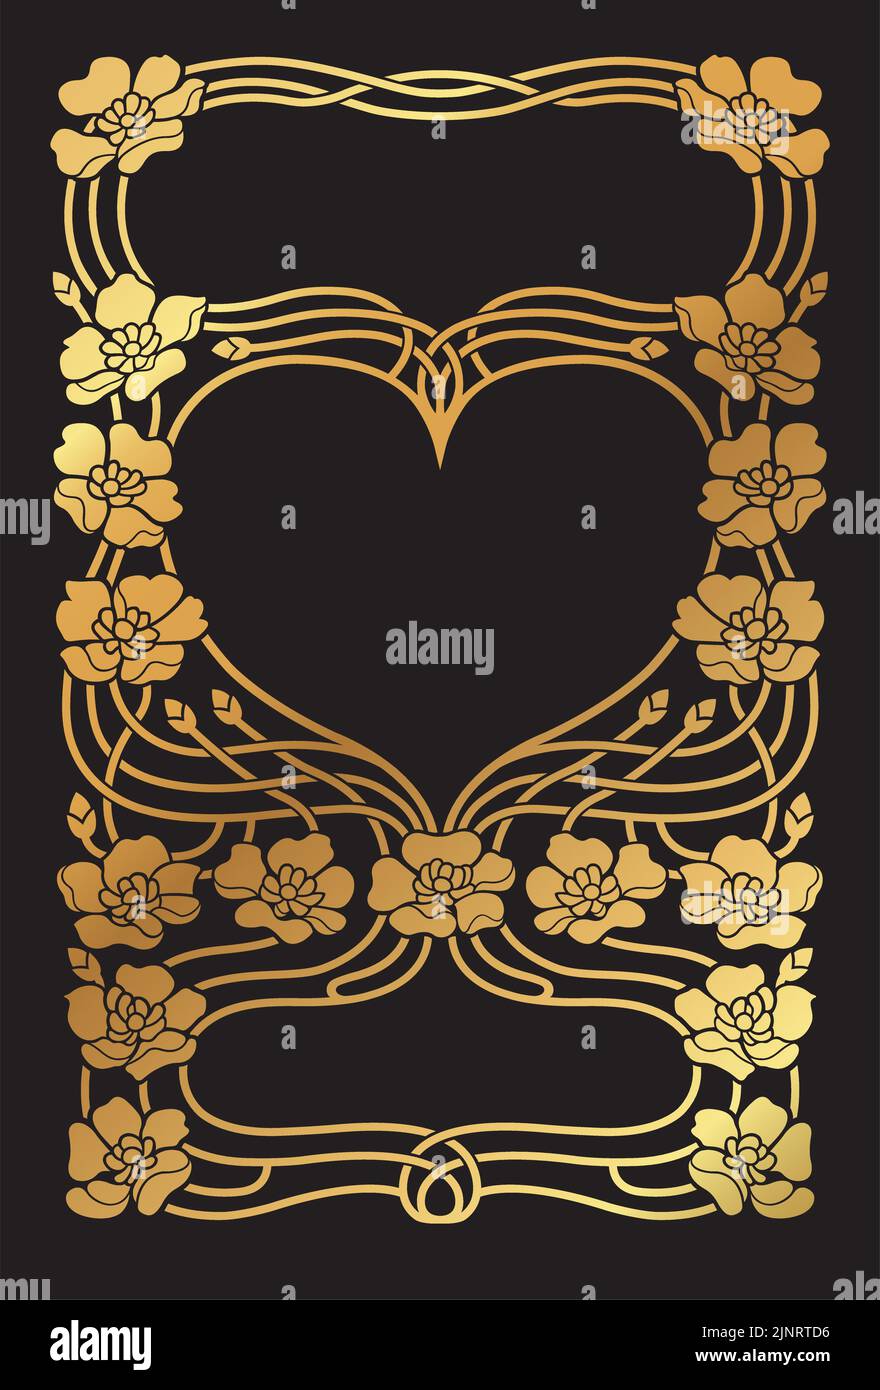 A vintage vector gold Art Nouveau style decorative border and frame with heart shapes and flowers. Stock Vector